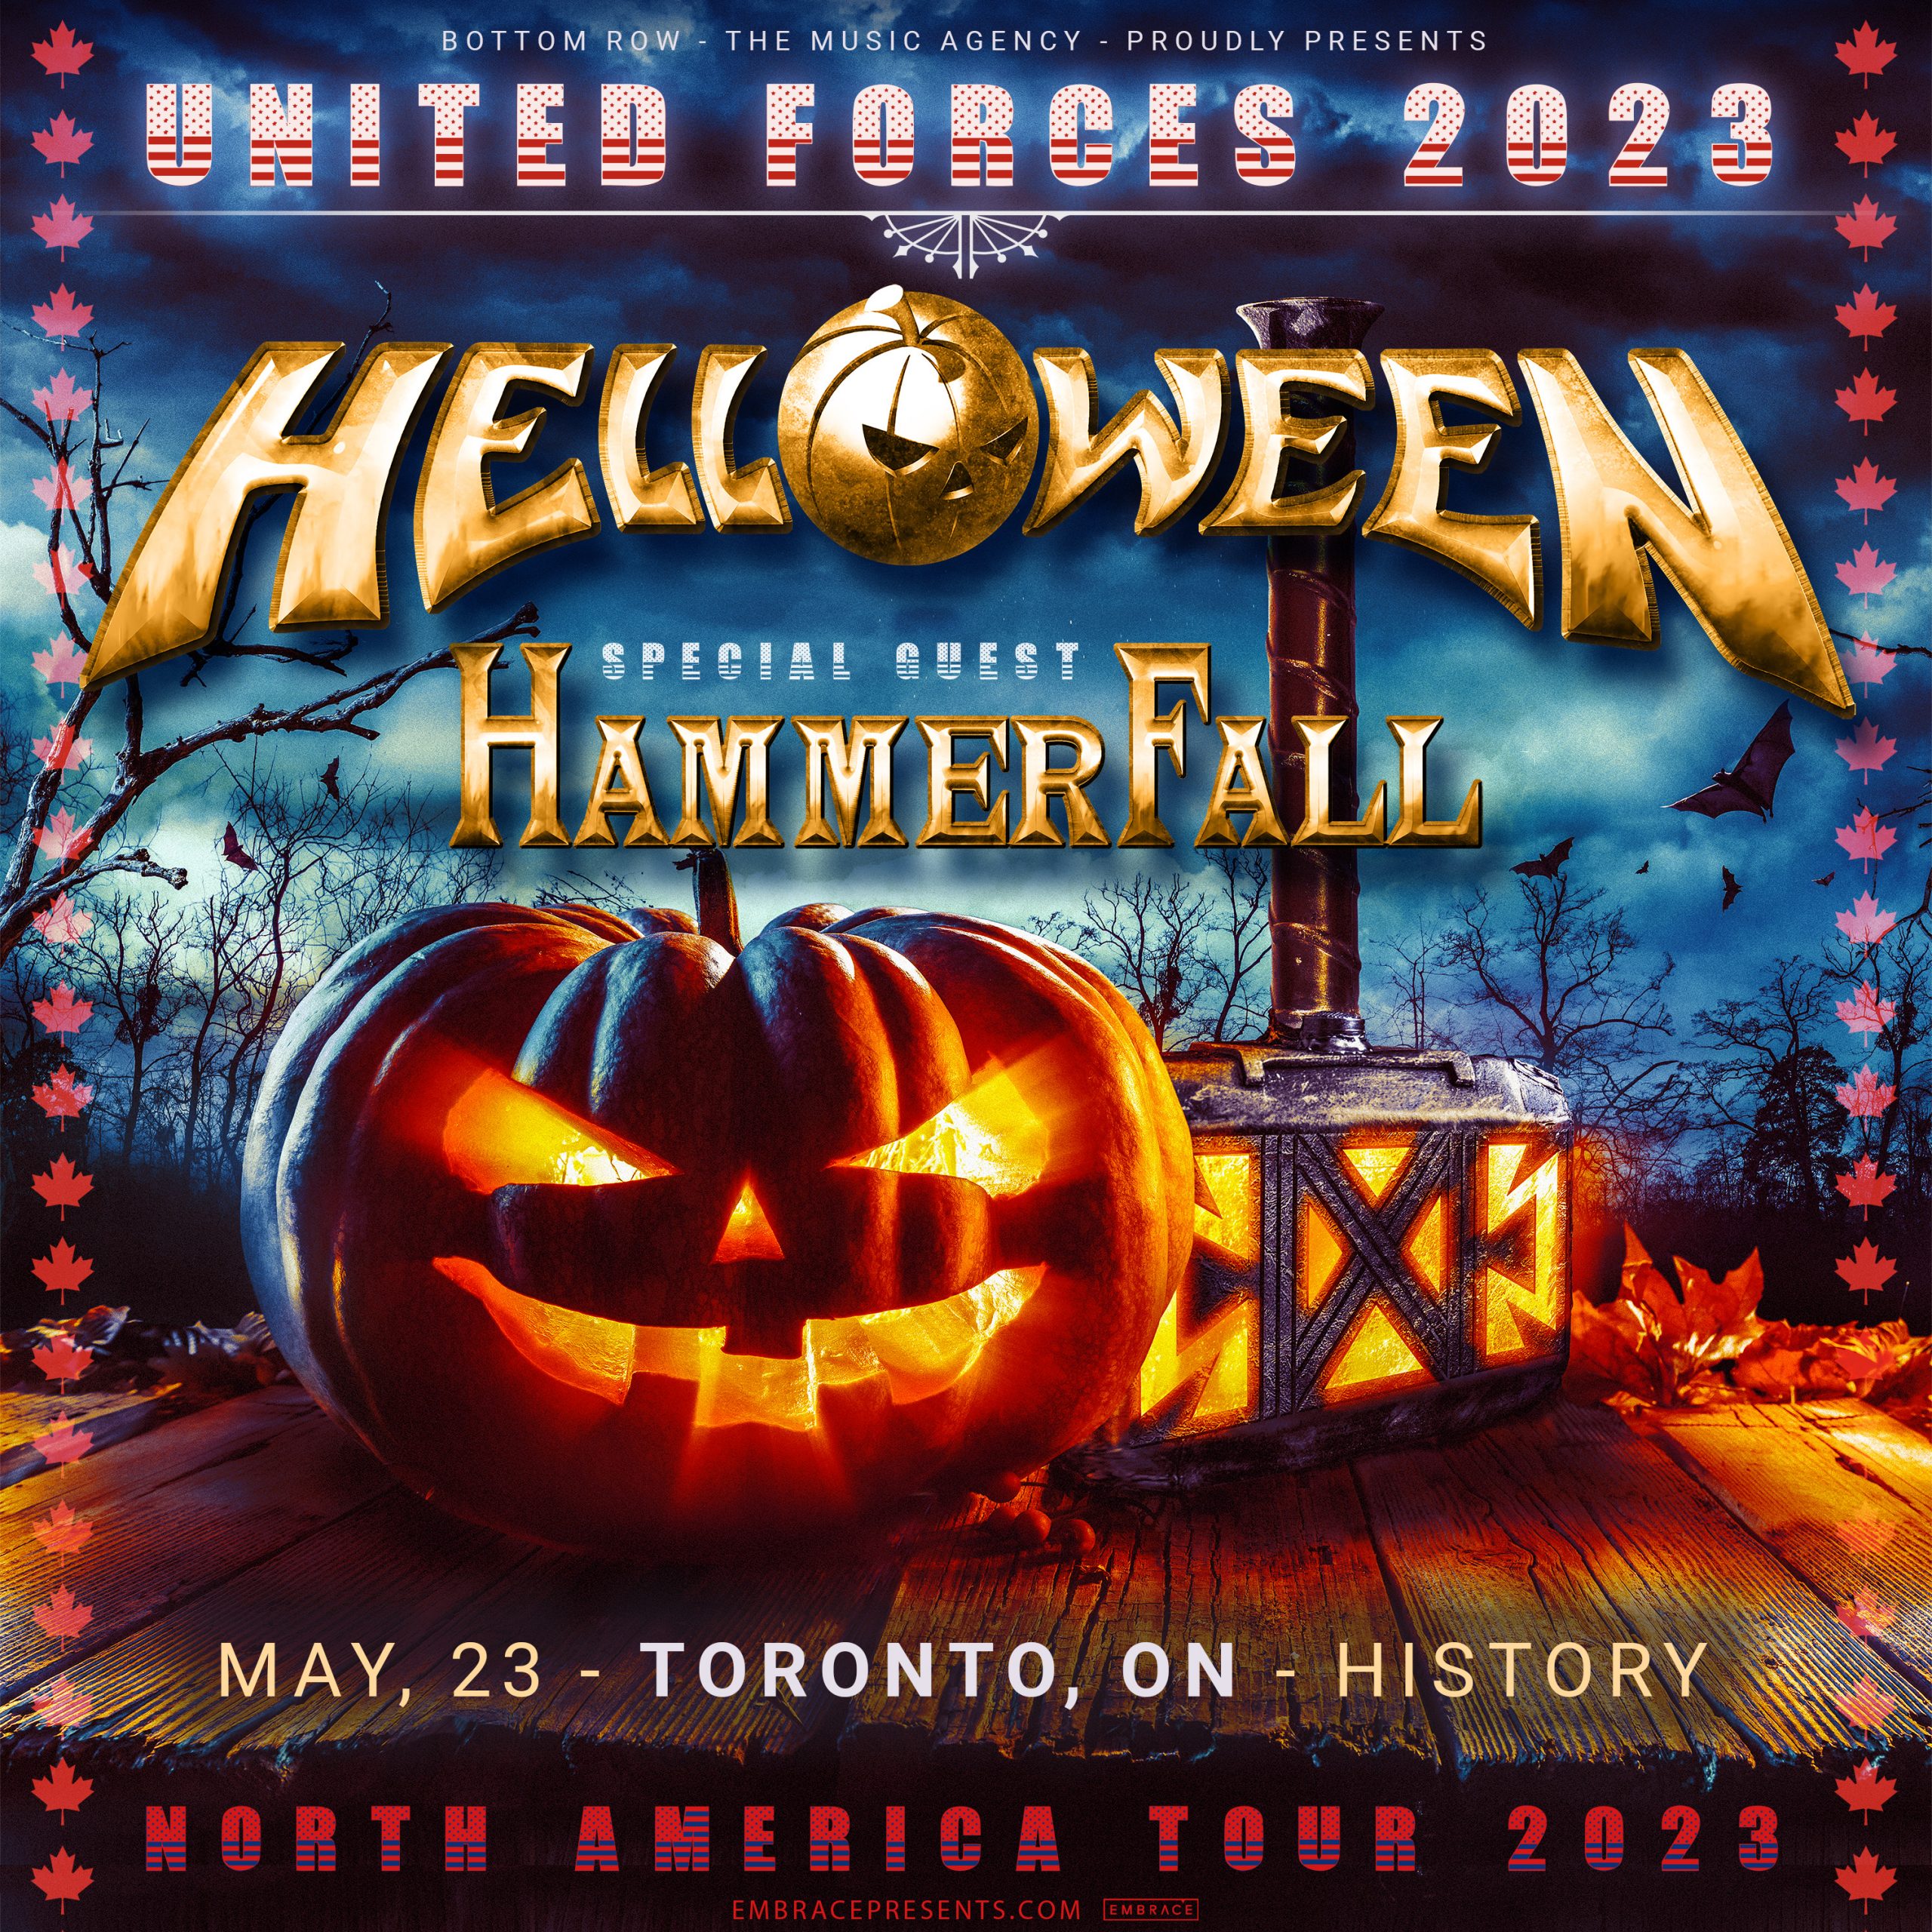 Concert Review Helloween (History, Toronto, ON, 05/23/2023) THE